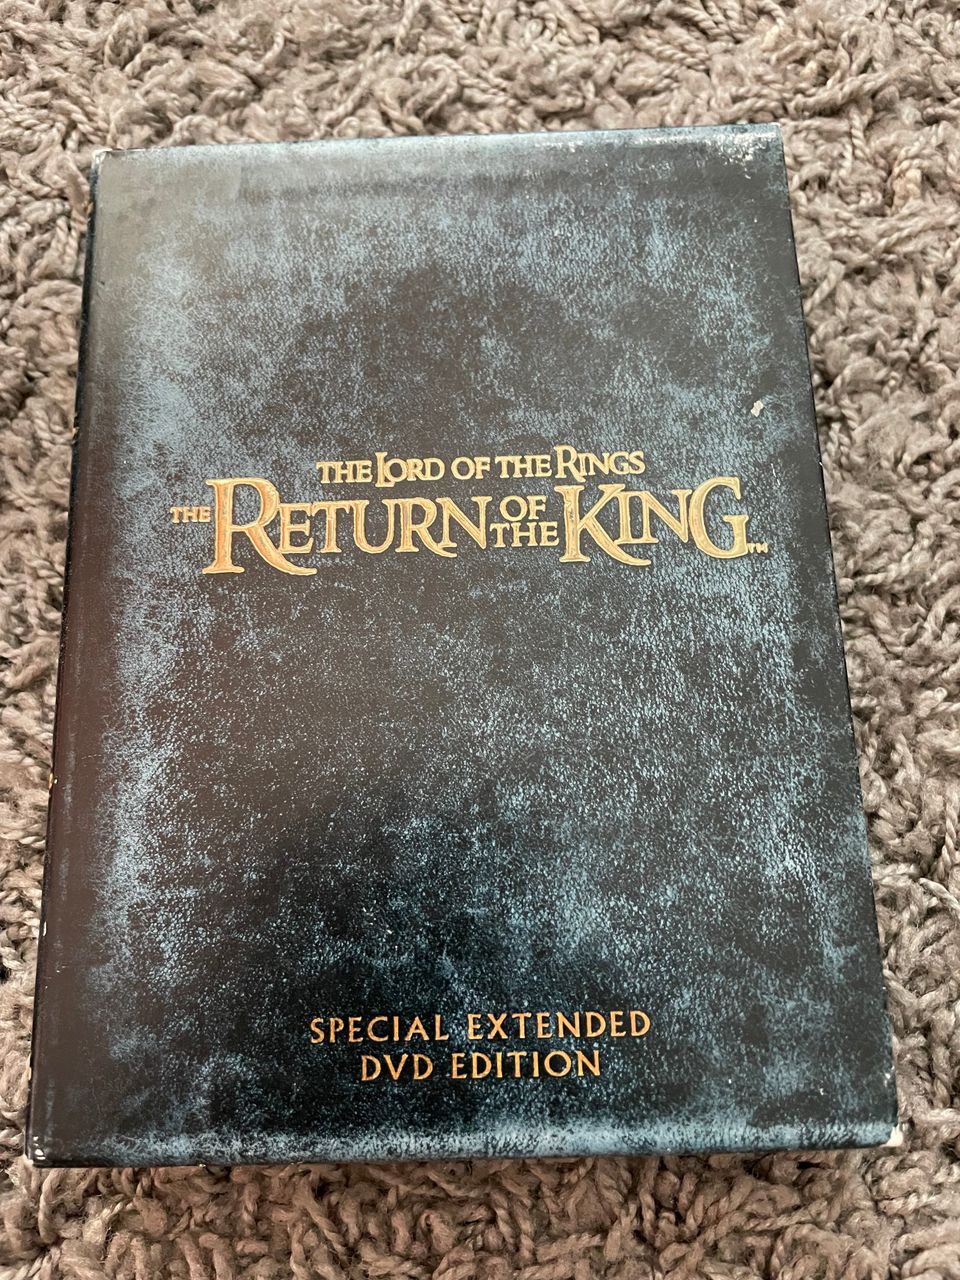 The Lord of the Rings -The Return of the King – Special Extended DVD